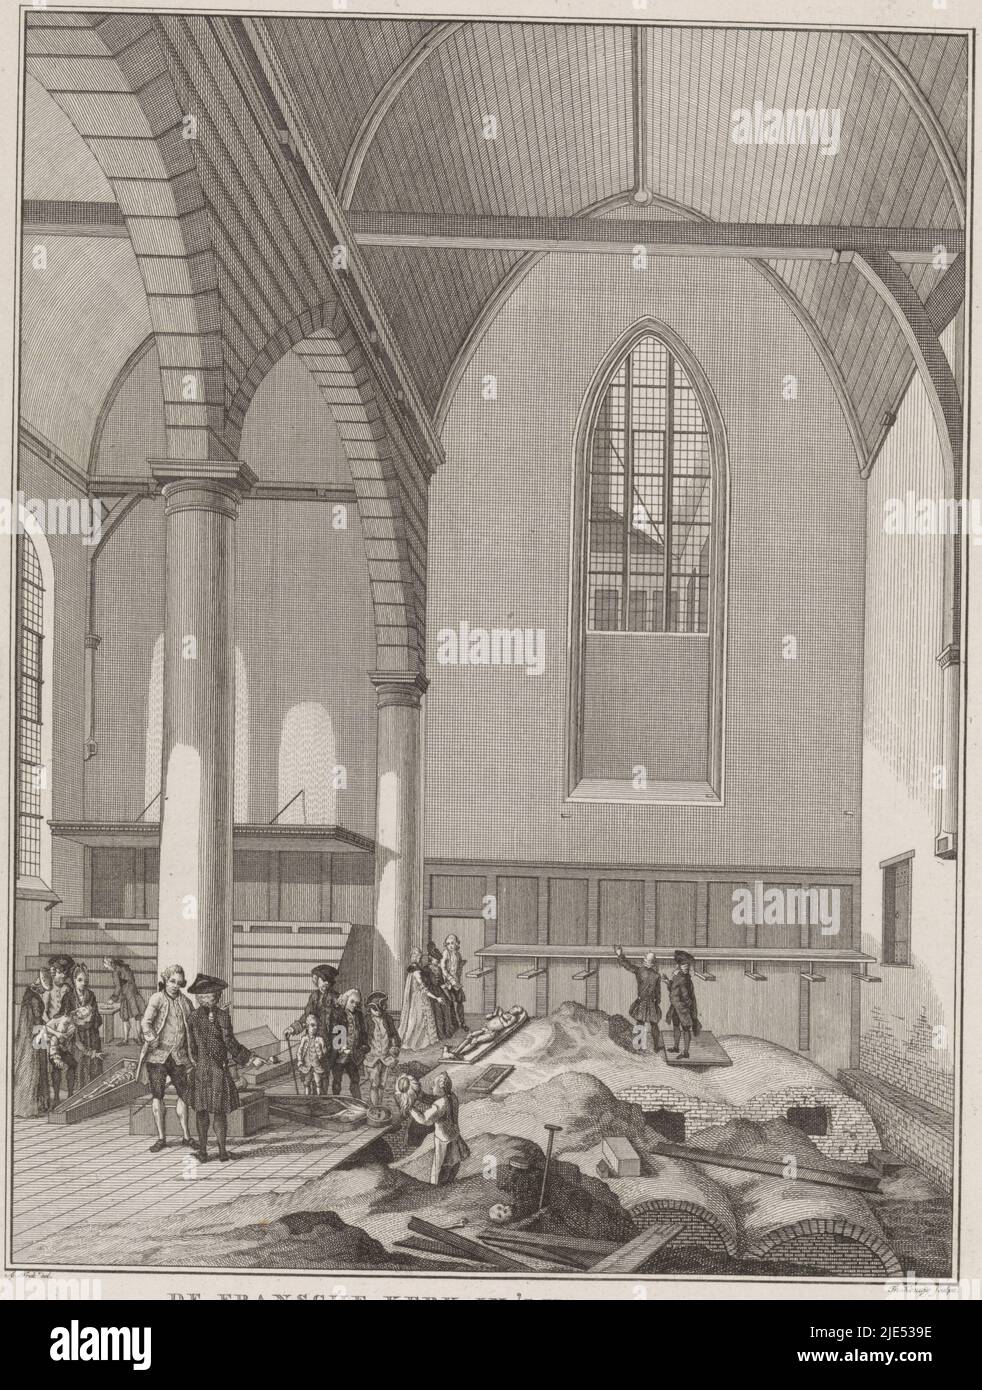 Church interior with the discovery of several tombstones with corpses during the excavations in the French Church or Hofkapel in The Hague, March 1770, Excavations in the French Church in The Hague, 1770 The French Church in 's Hage, inside, With the discovery of several Sepulchres, Lyken and other overblyphers, by the decomposition of the Foundations., print maker: Theodoor Koning, (mentioned on object), intermediary draughtsman: A. Frek, (mentioned on object), Northern Netherlands, 1770, paper, etching, engraving, h 277 mm × w 214 mm Stock Photo